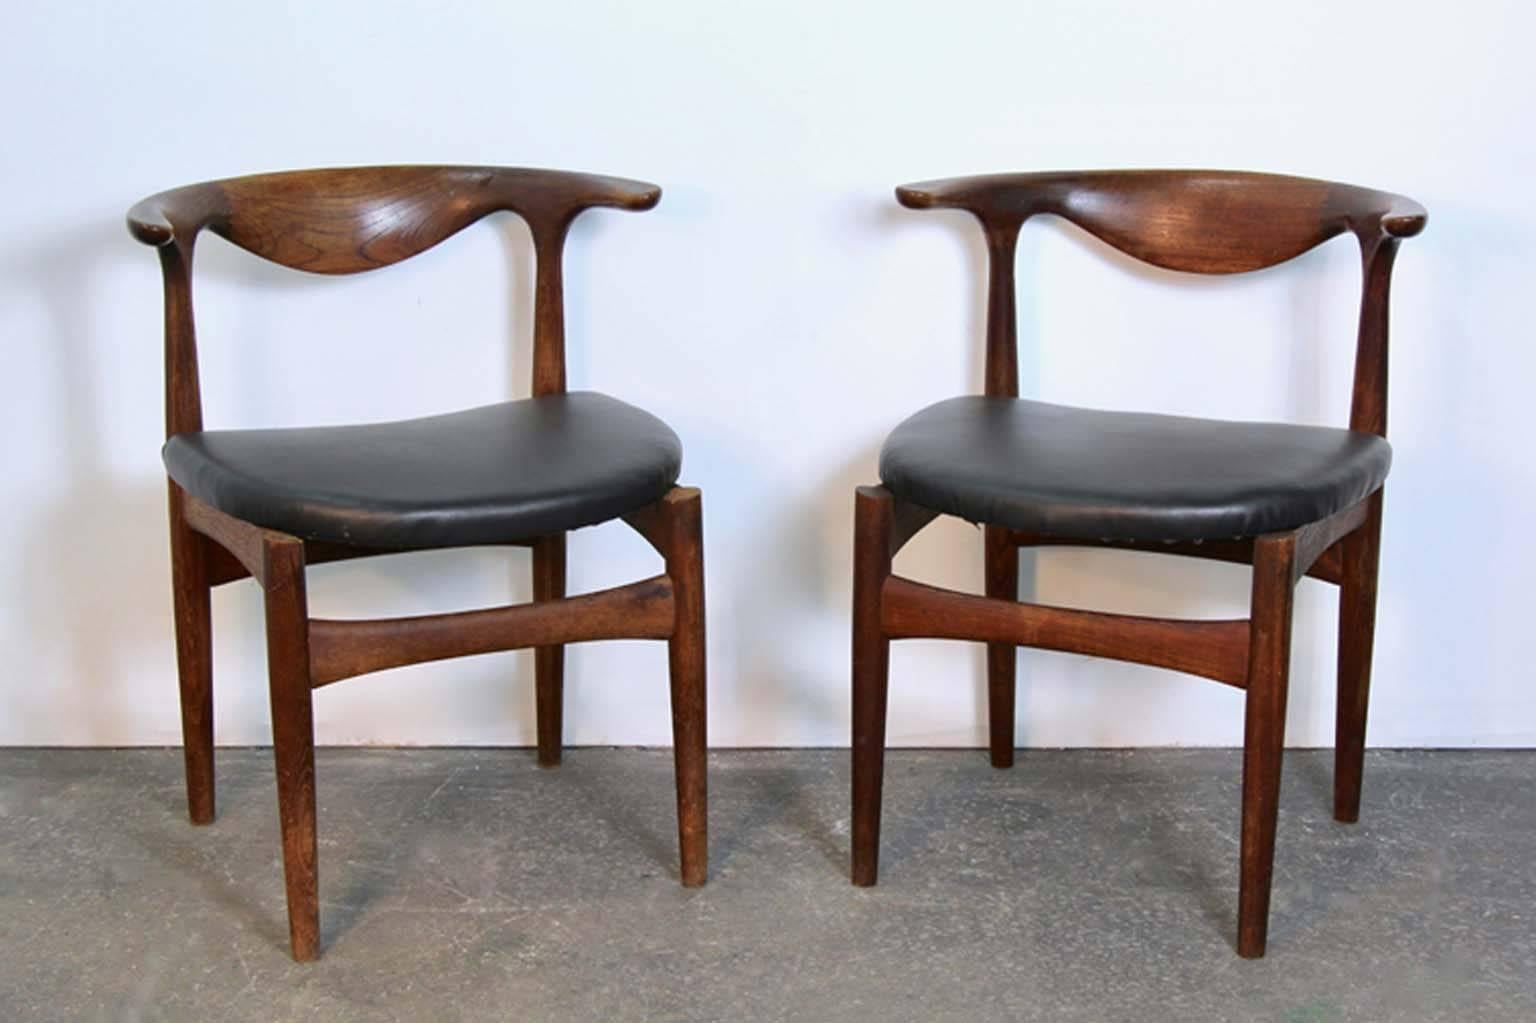 Pair of Scandinavian modern teak and leather chairs. Bullhorn style dining armchairs. Newly upholstered in black leather. One seat labeled Made in Denmark, no other markings.